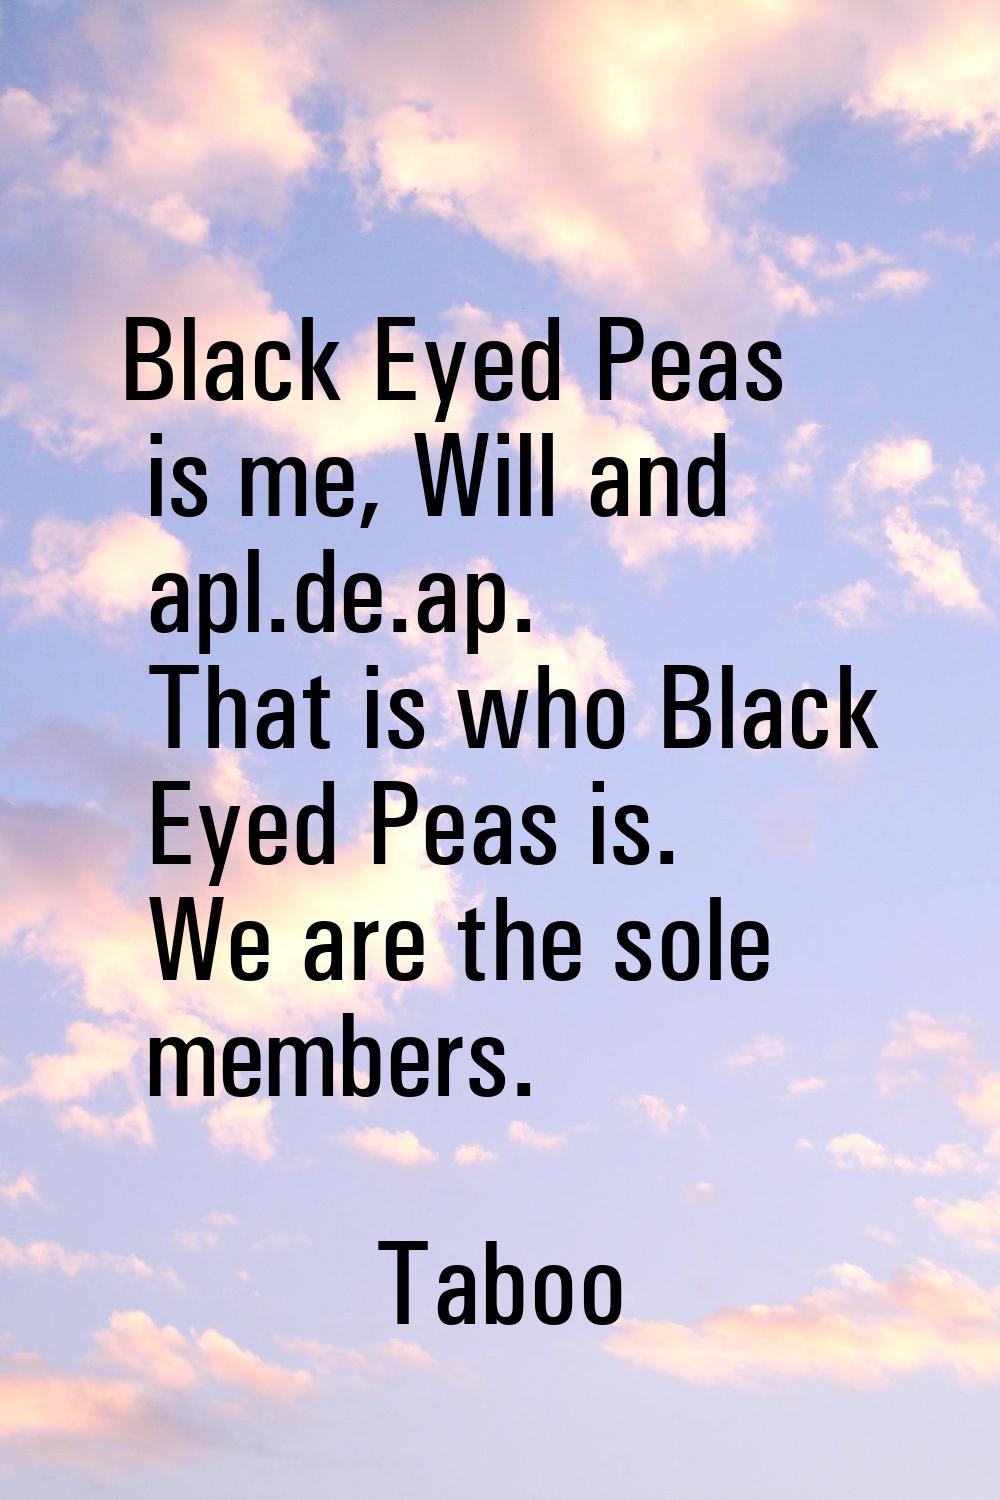 Black Eyed Peas is me, Will and apl.de.ap. That is who Black Eyed Peas is. We are the sole members.